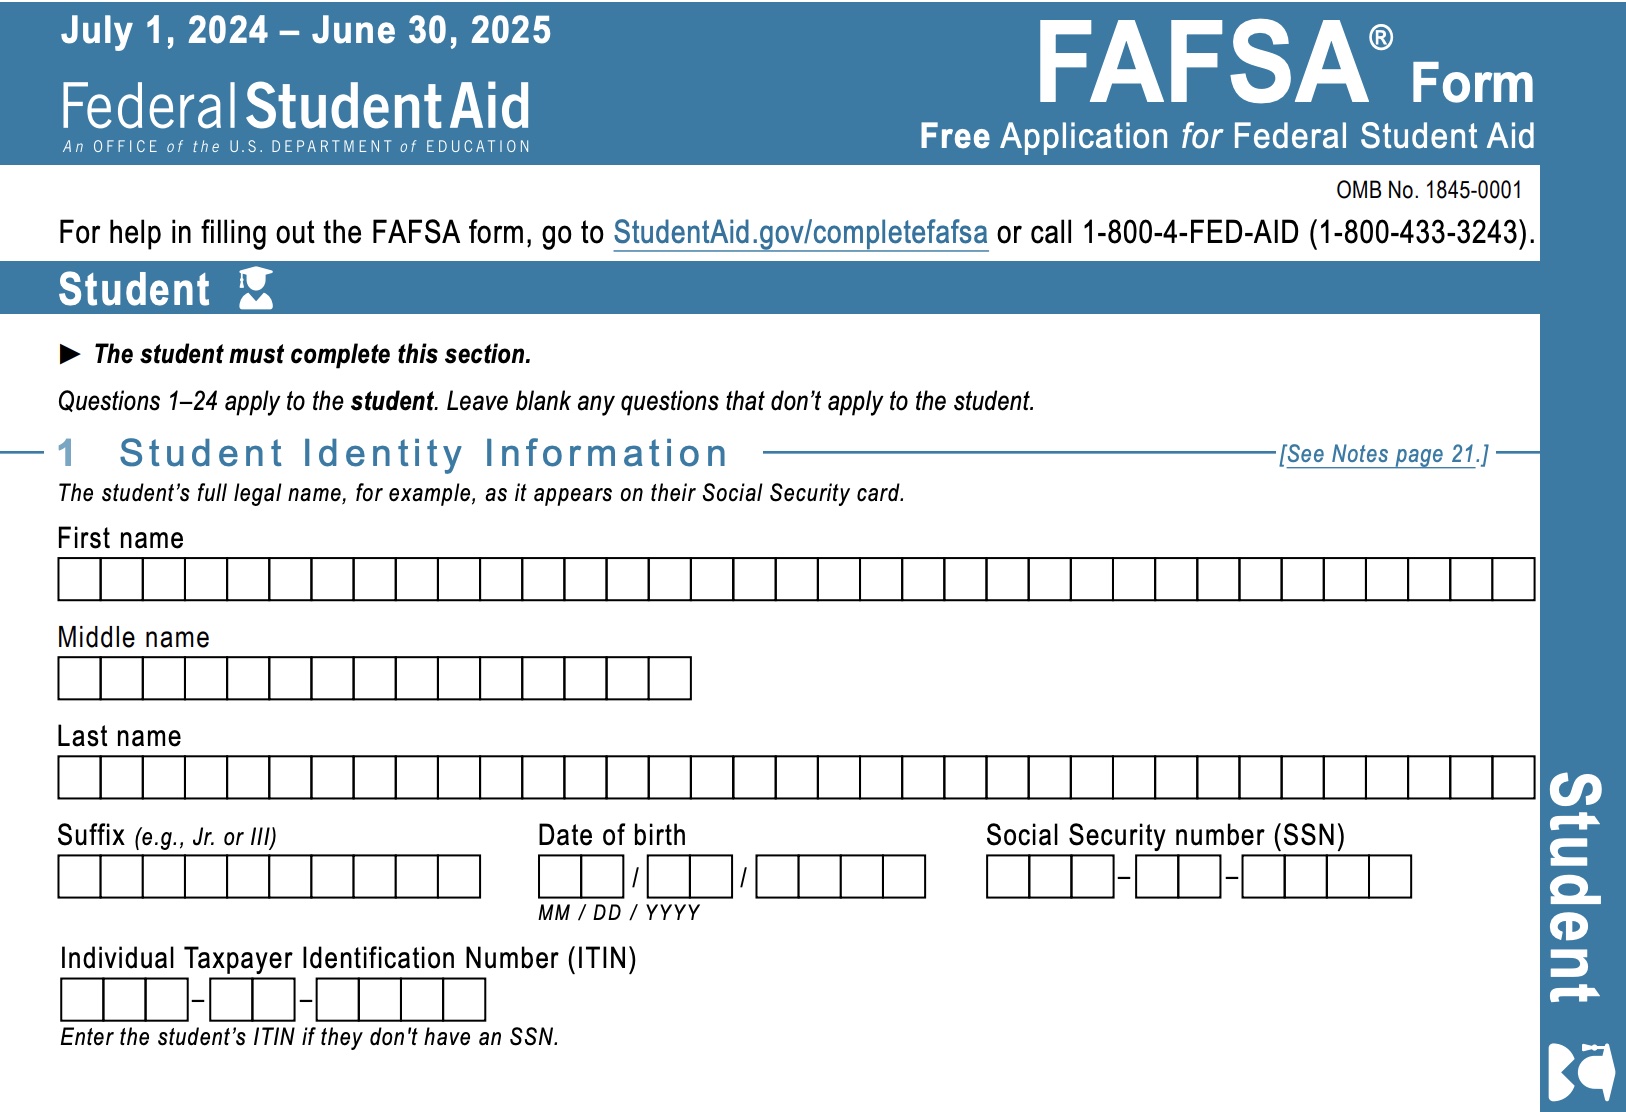 FAFSA Grants 2024: What You Need to Know